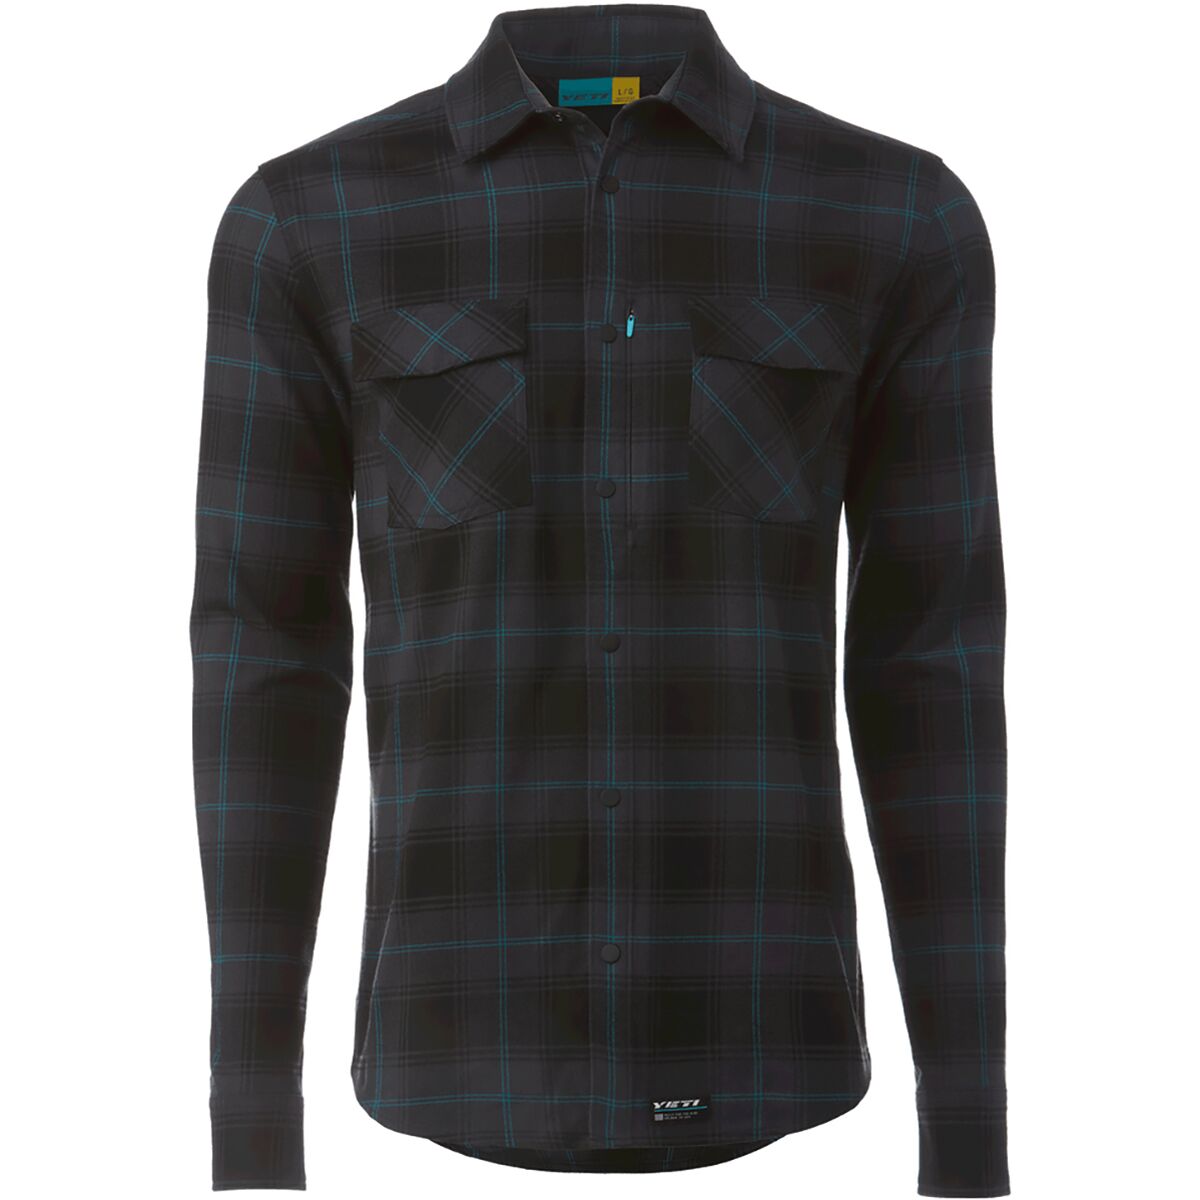 Yeti Cycles Stagecoach Flannel Shirt - Men's